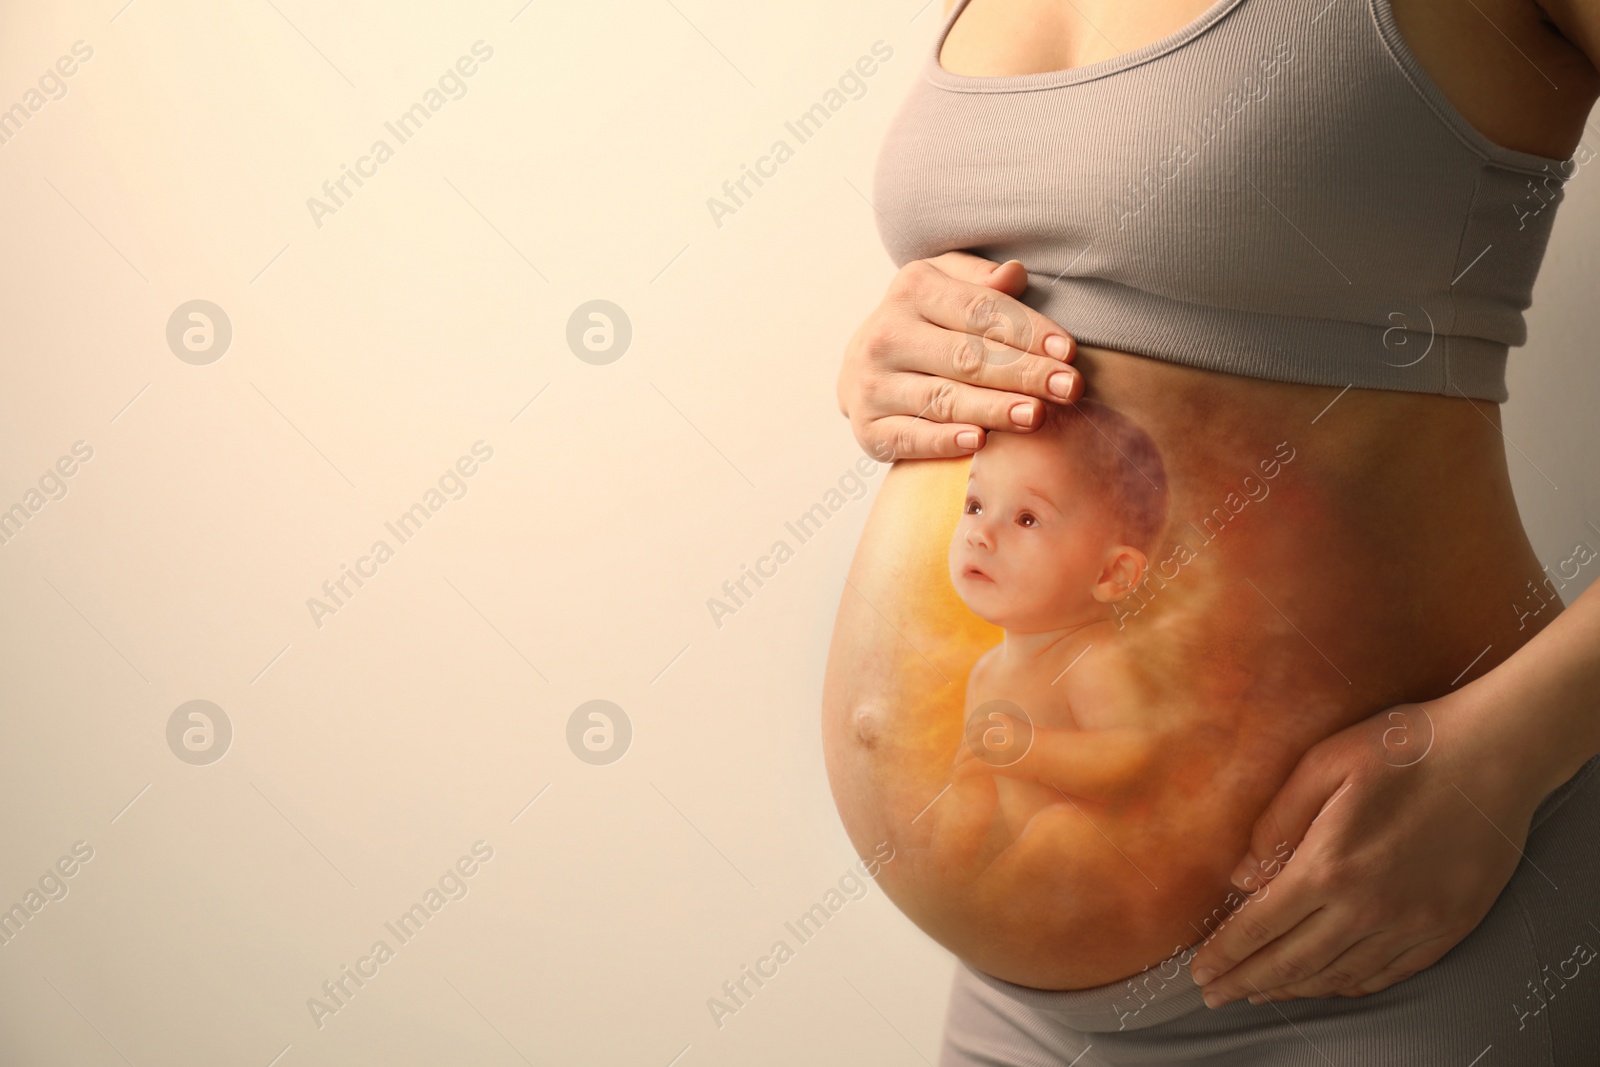 Image of Pregnant woman and baby on beige background, closeup view of belly. Double exposure